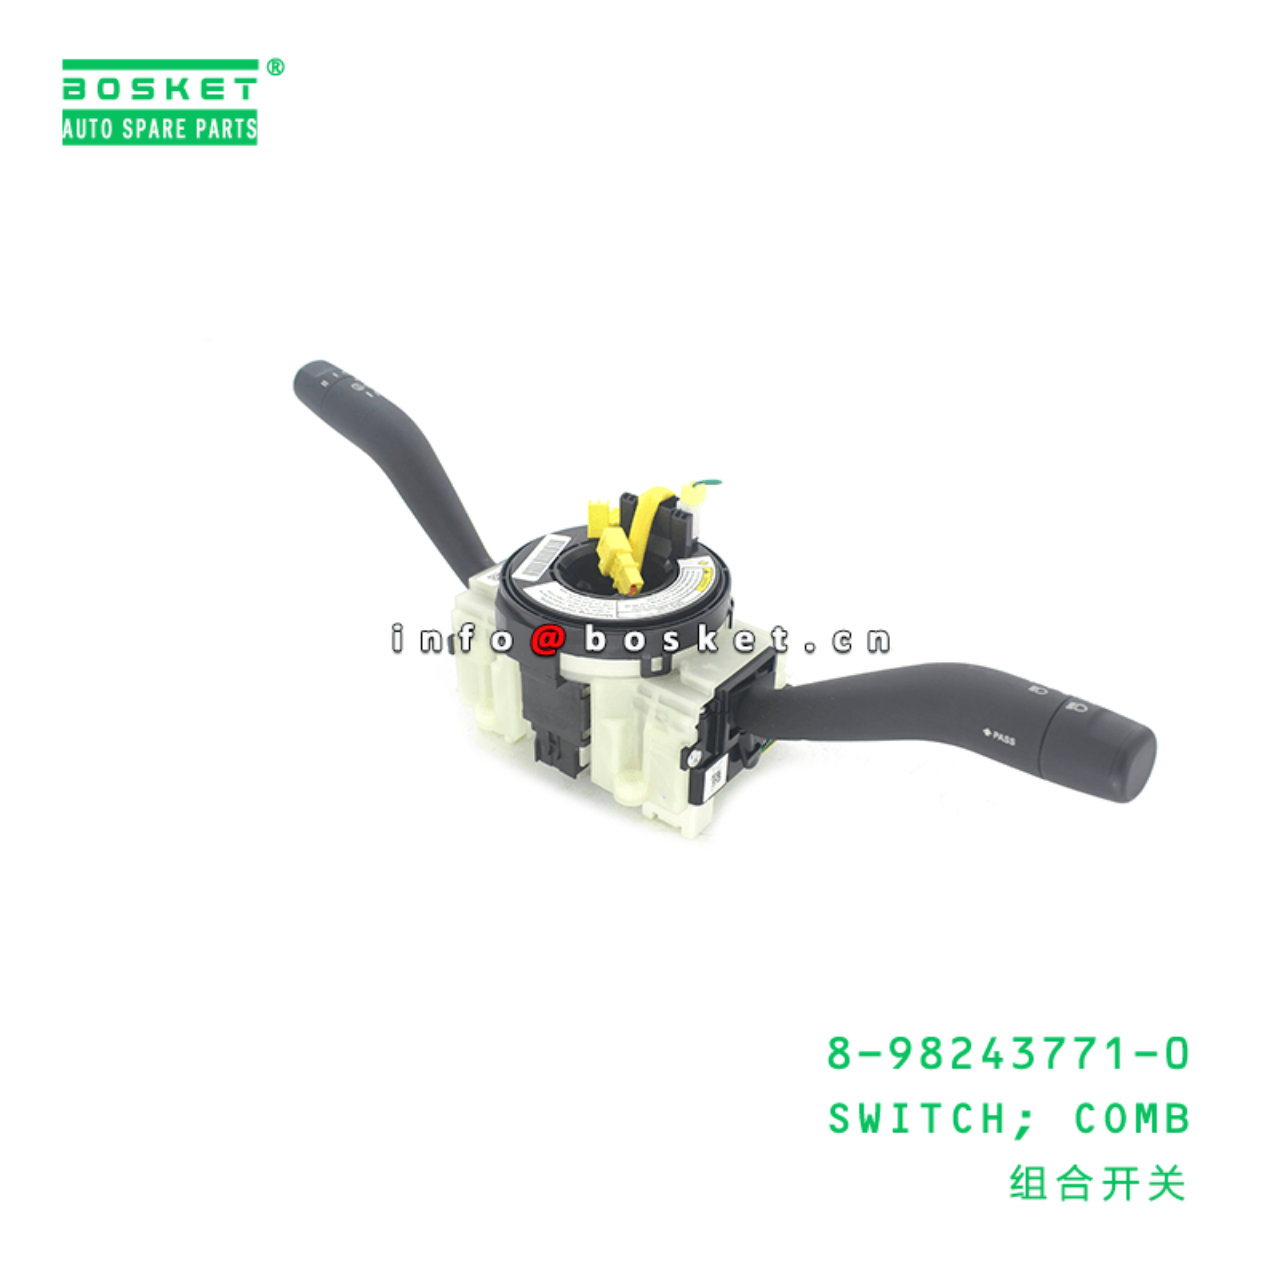 8-98243771-0 Combination Switch 8982437710 Suitable for ISUZU F Series Truck